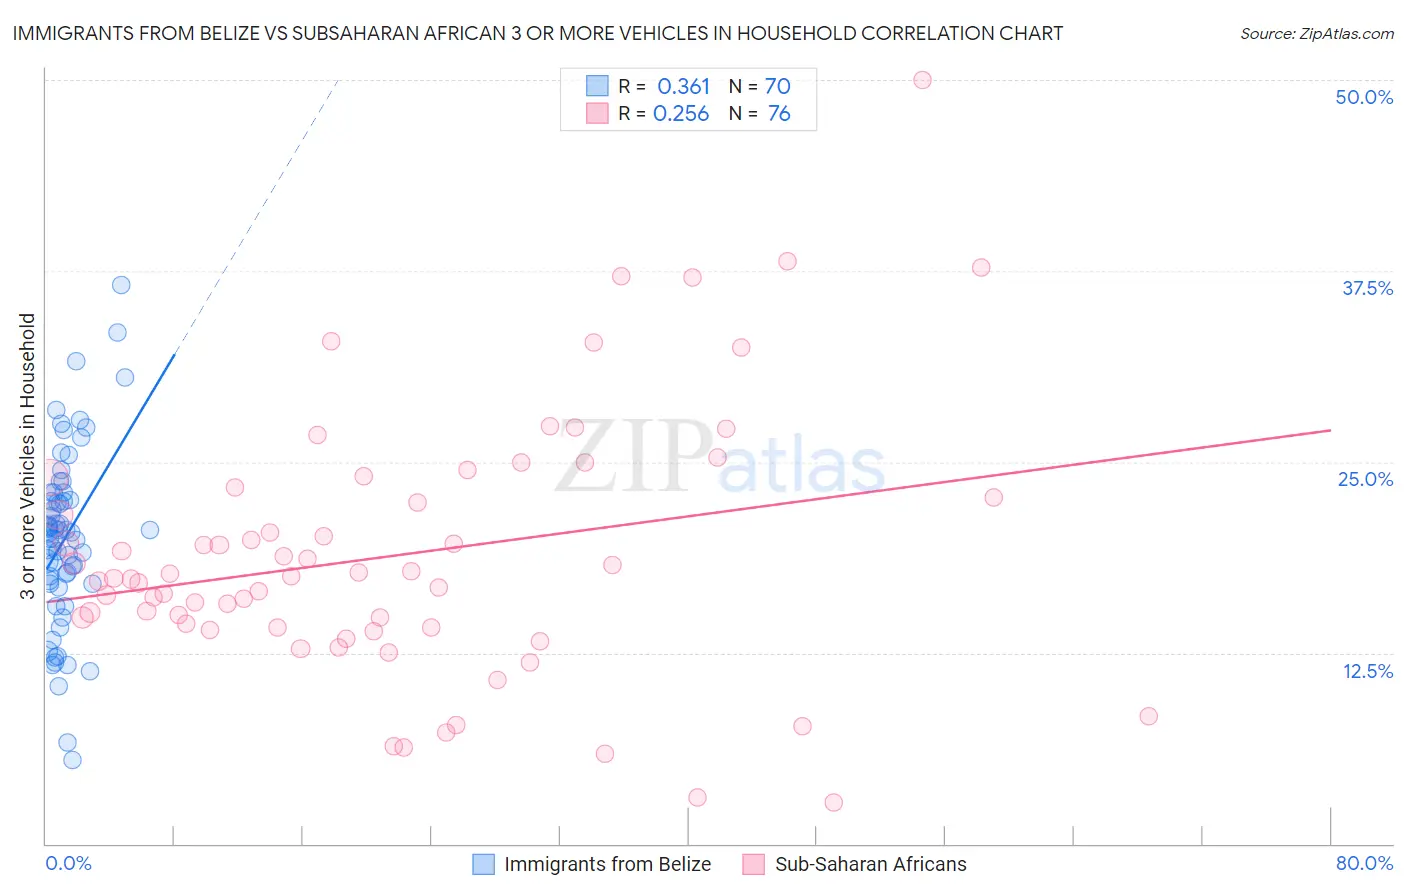 Immigrants from Belize vs Subsaharan African 3 or more Vehicles in Household